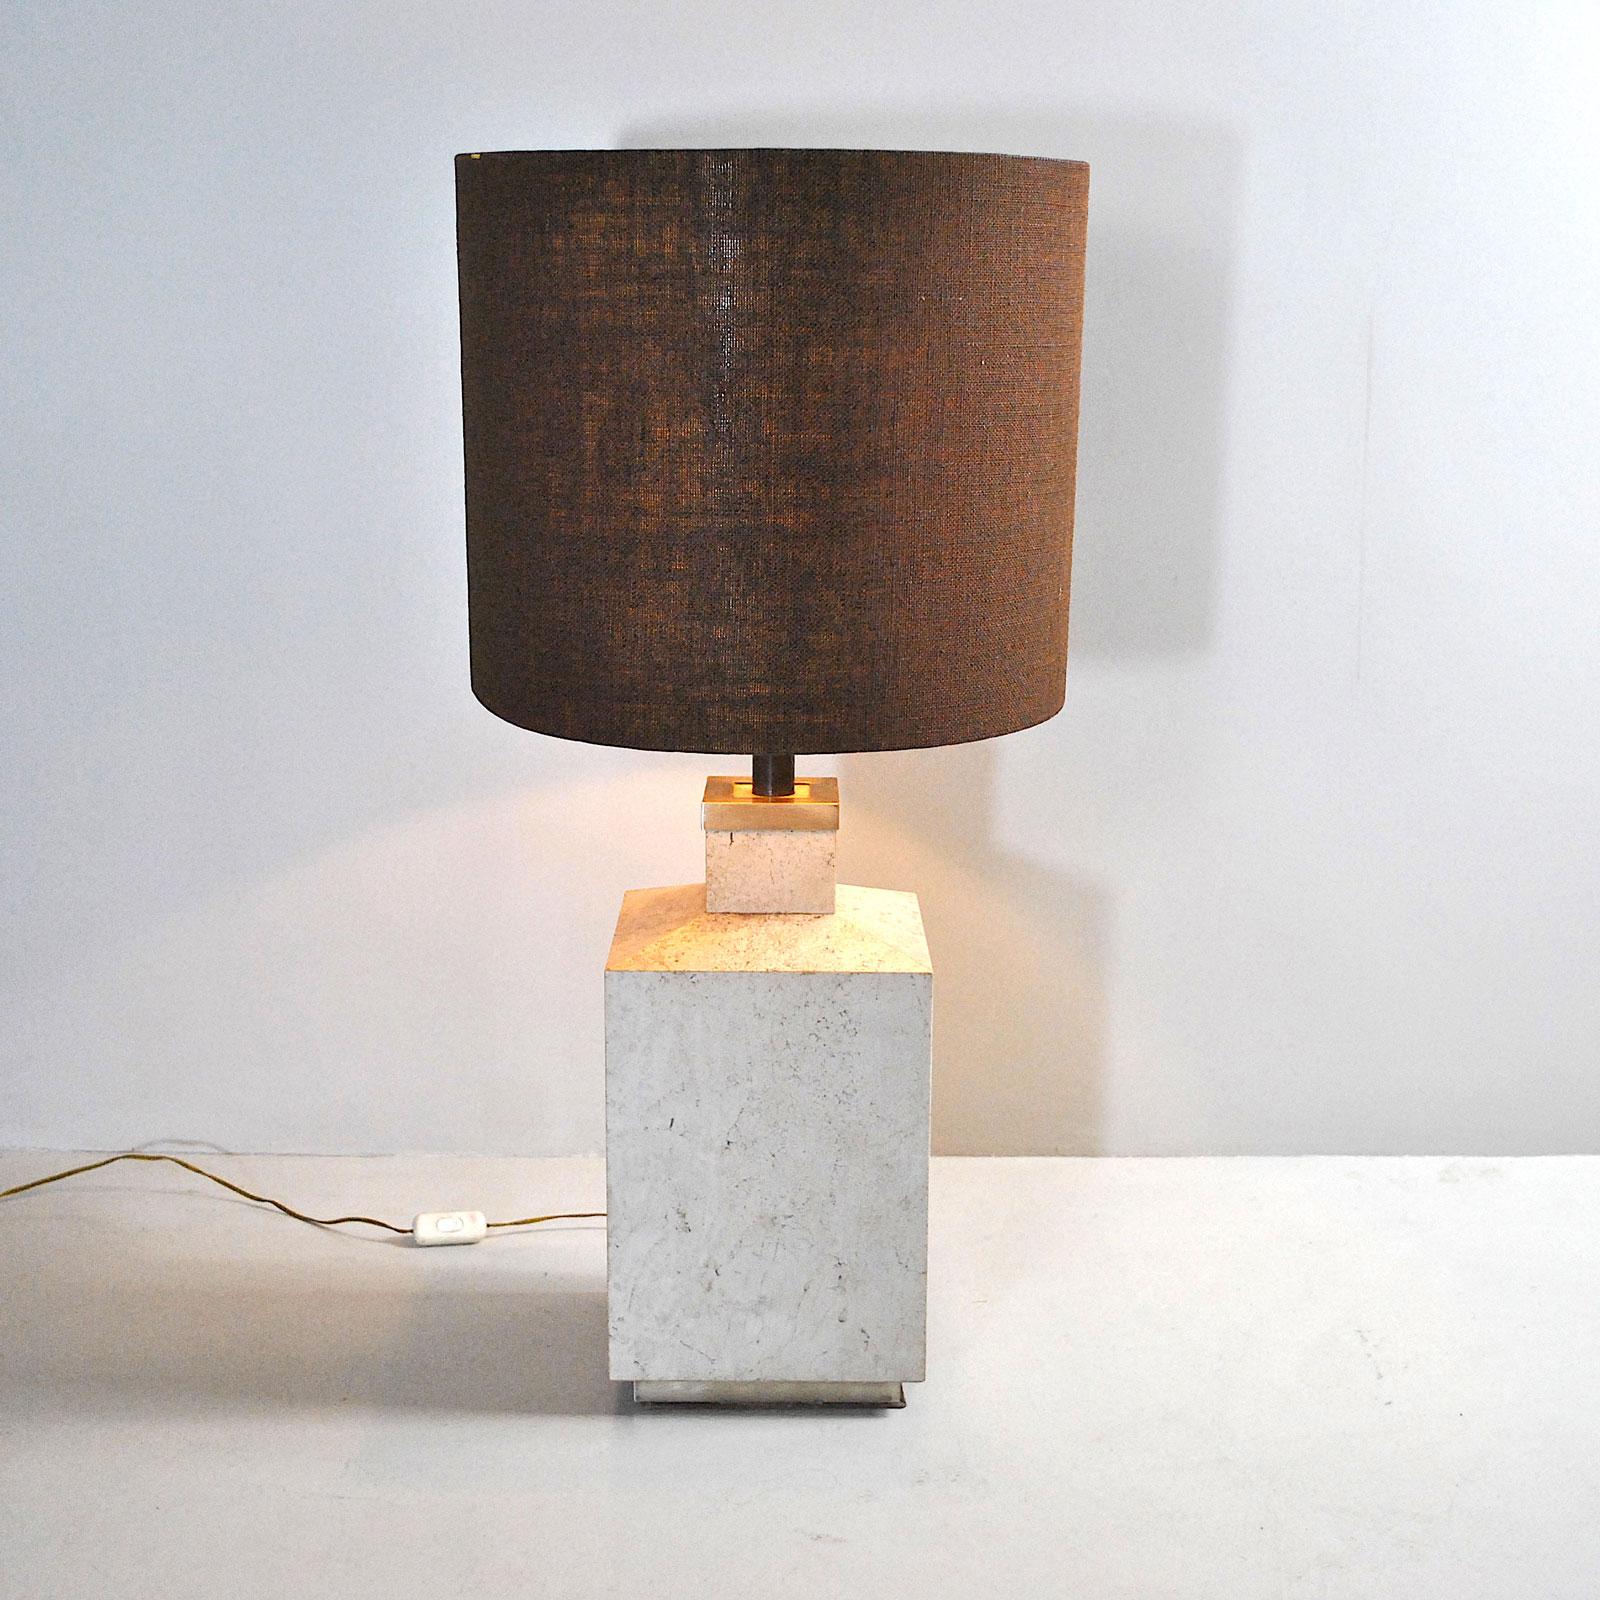 Italian Midcentury Table Lamp Form the 1970s For Sale 2